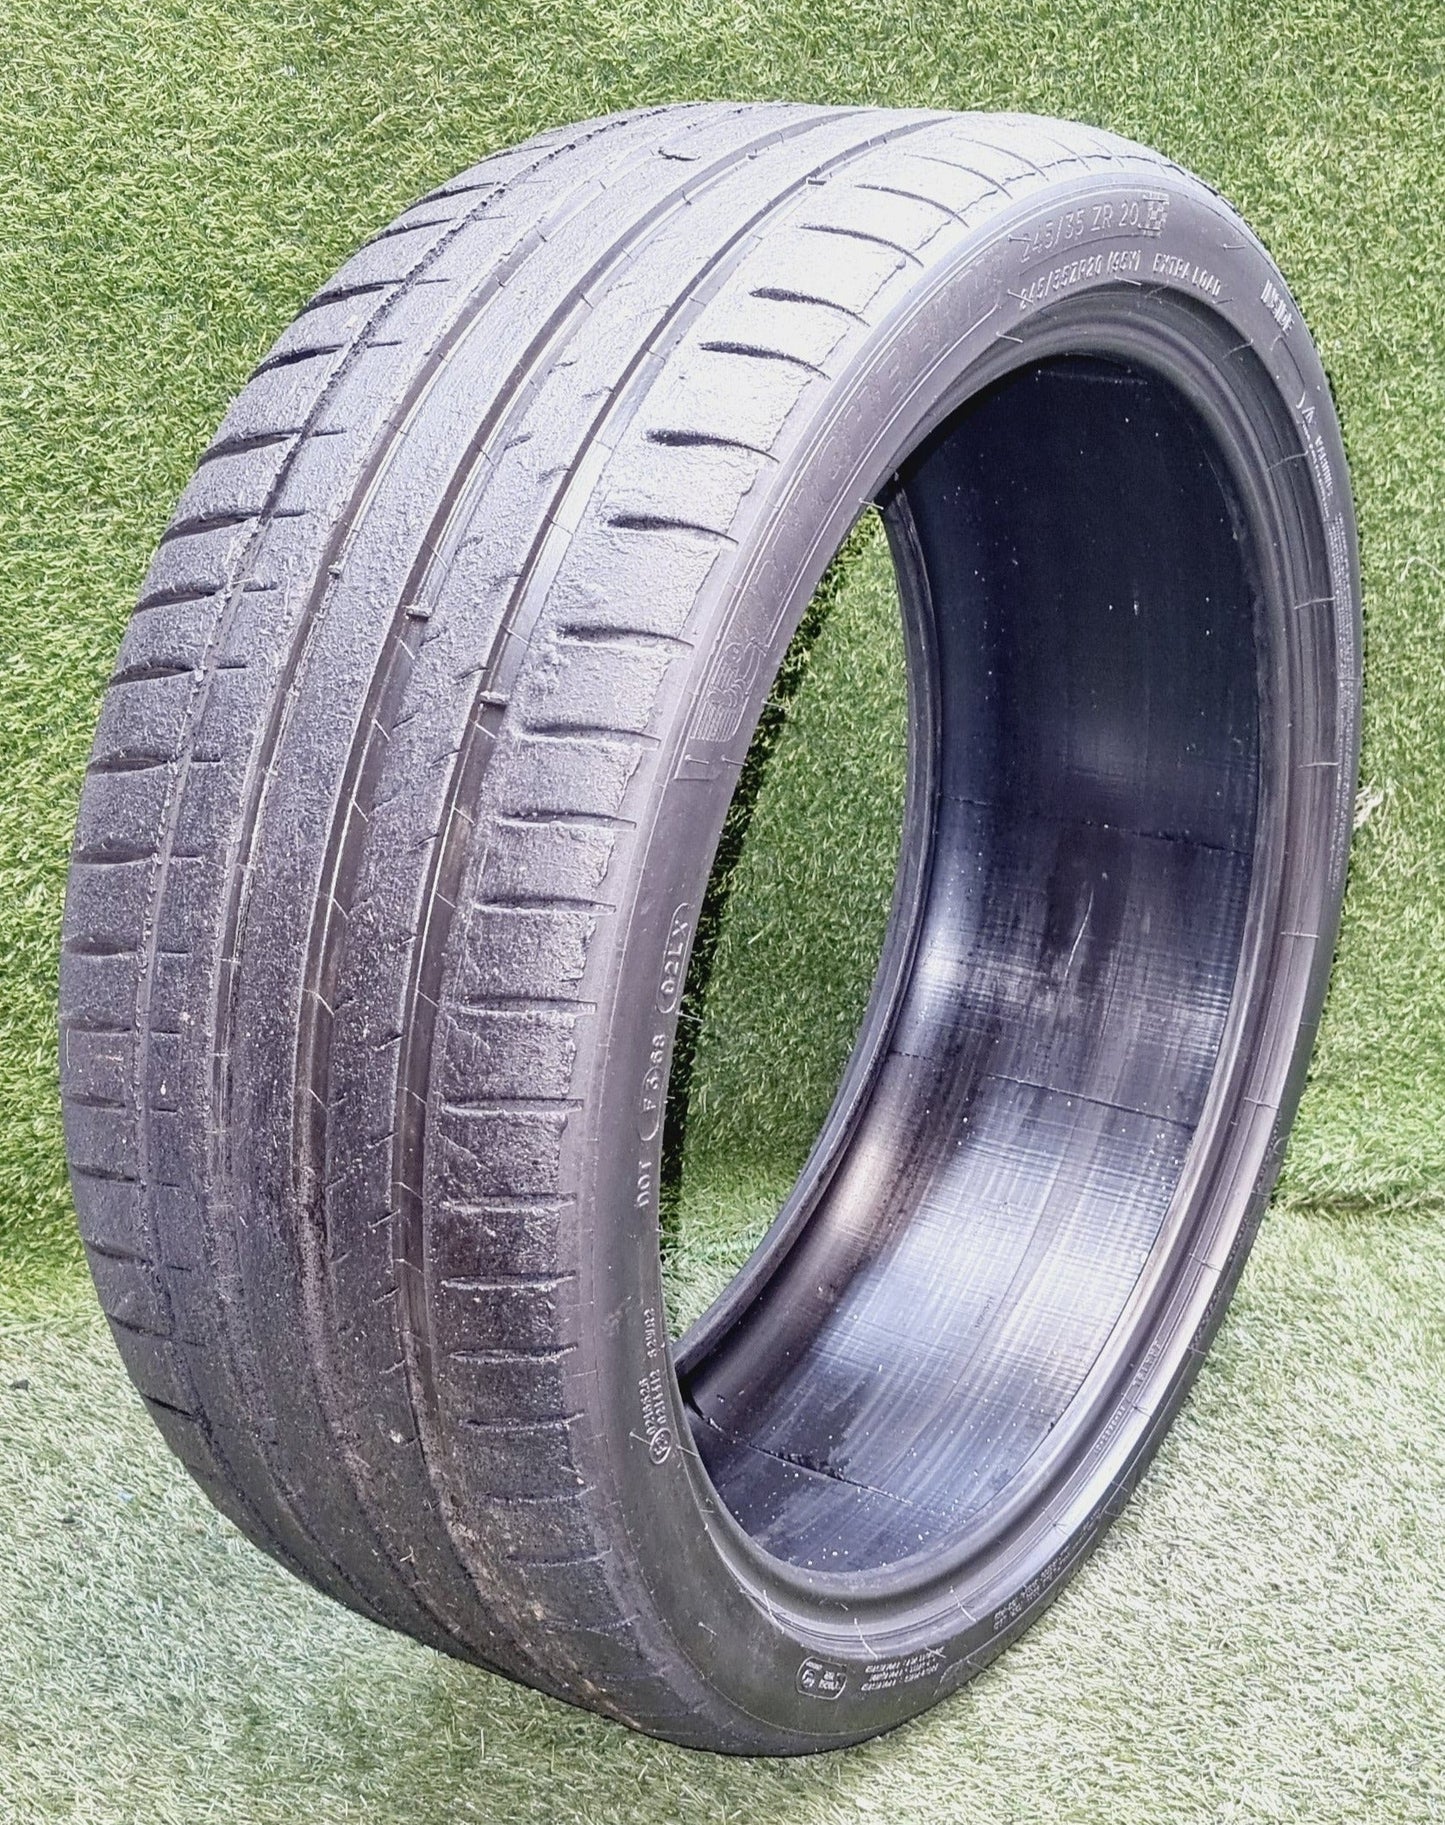 Michelin Pilot 4S 245/35/20 - 5mm tread. Price is per tyre, several available